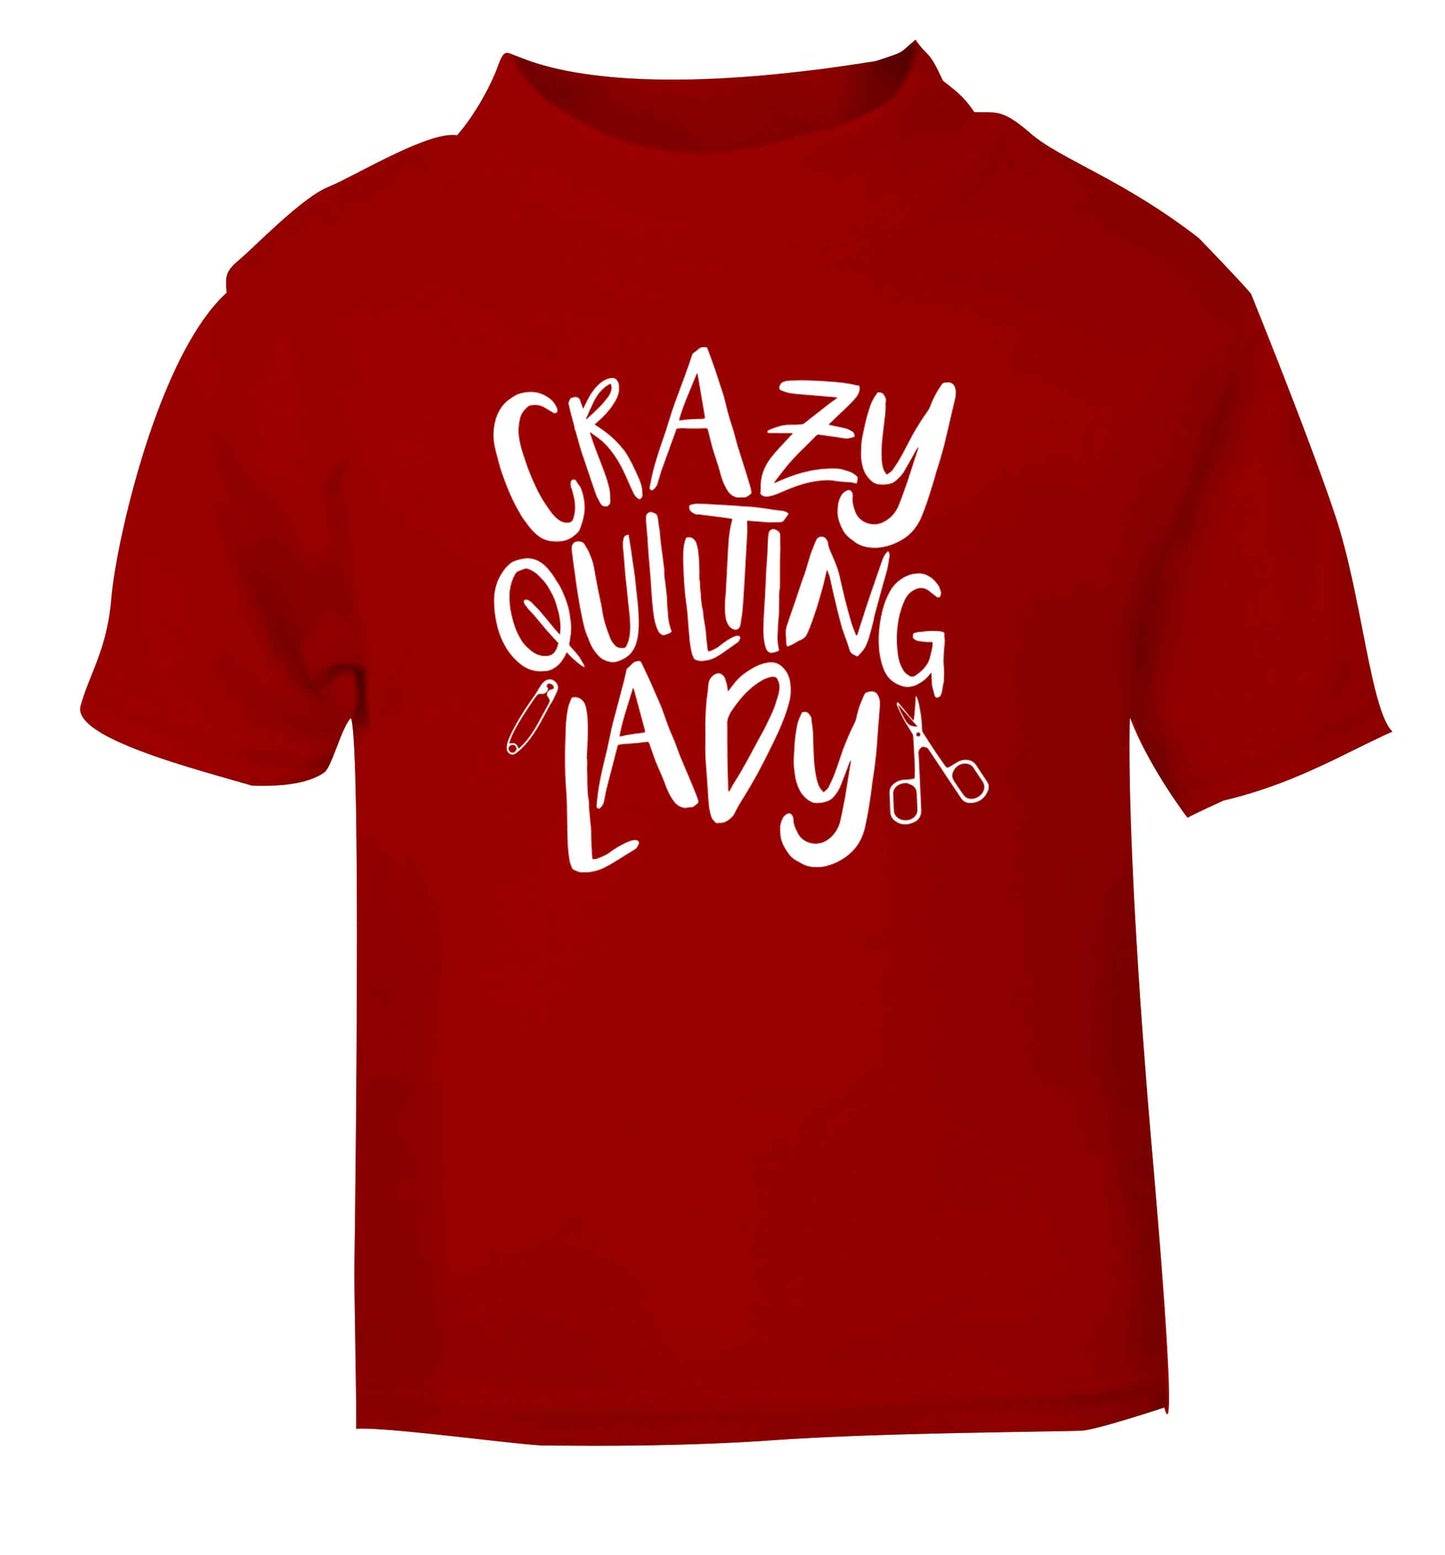 Crazy quilting lady red Baby Toddler Tshirt 2 Years